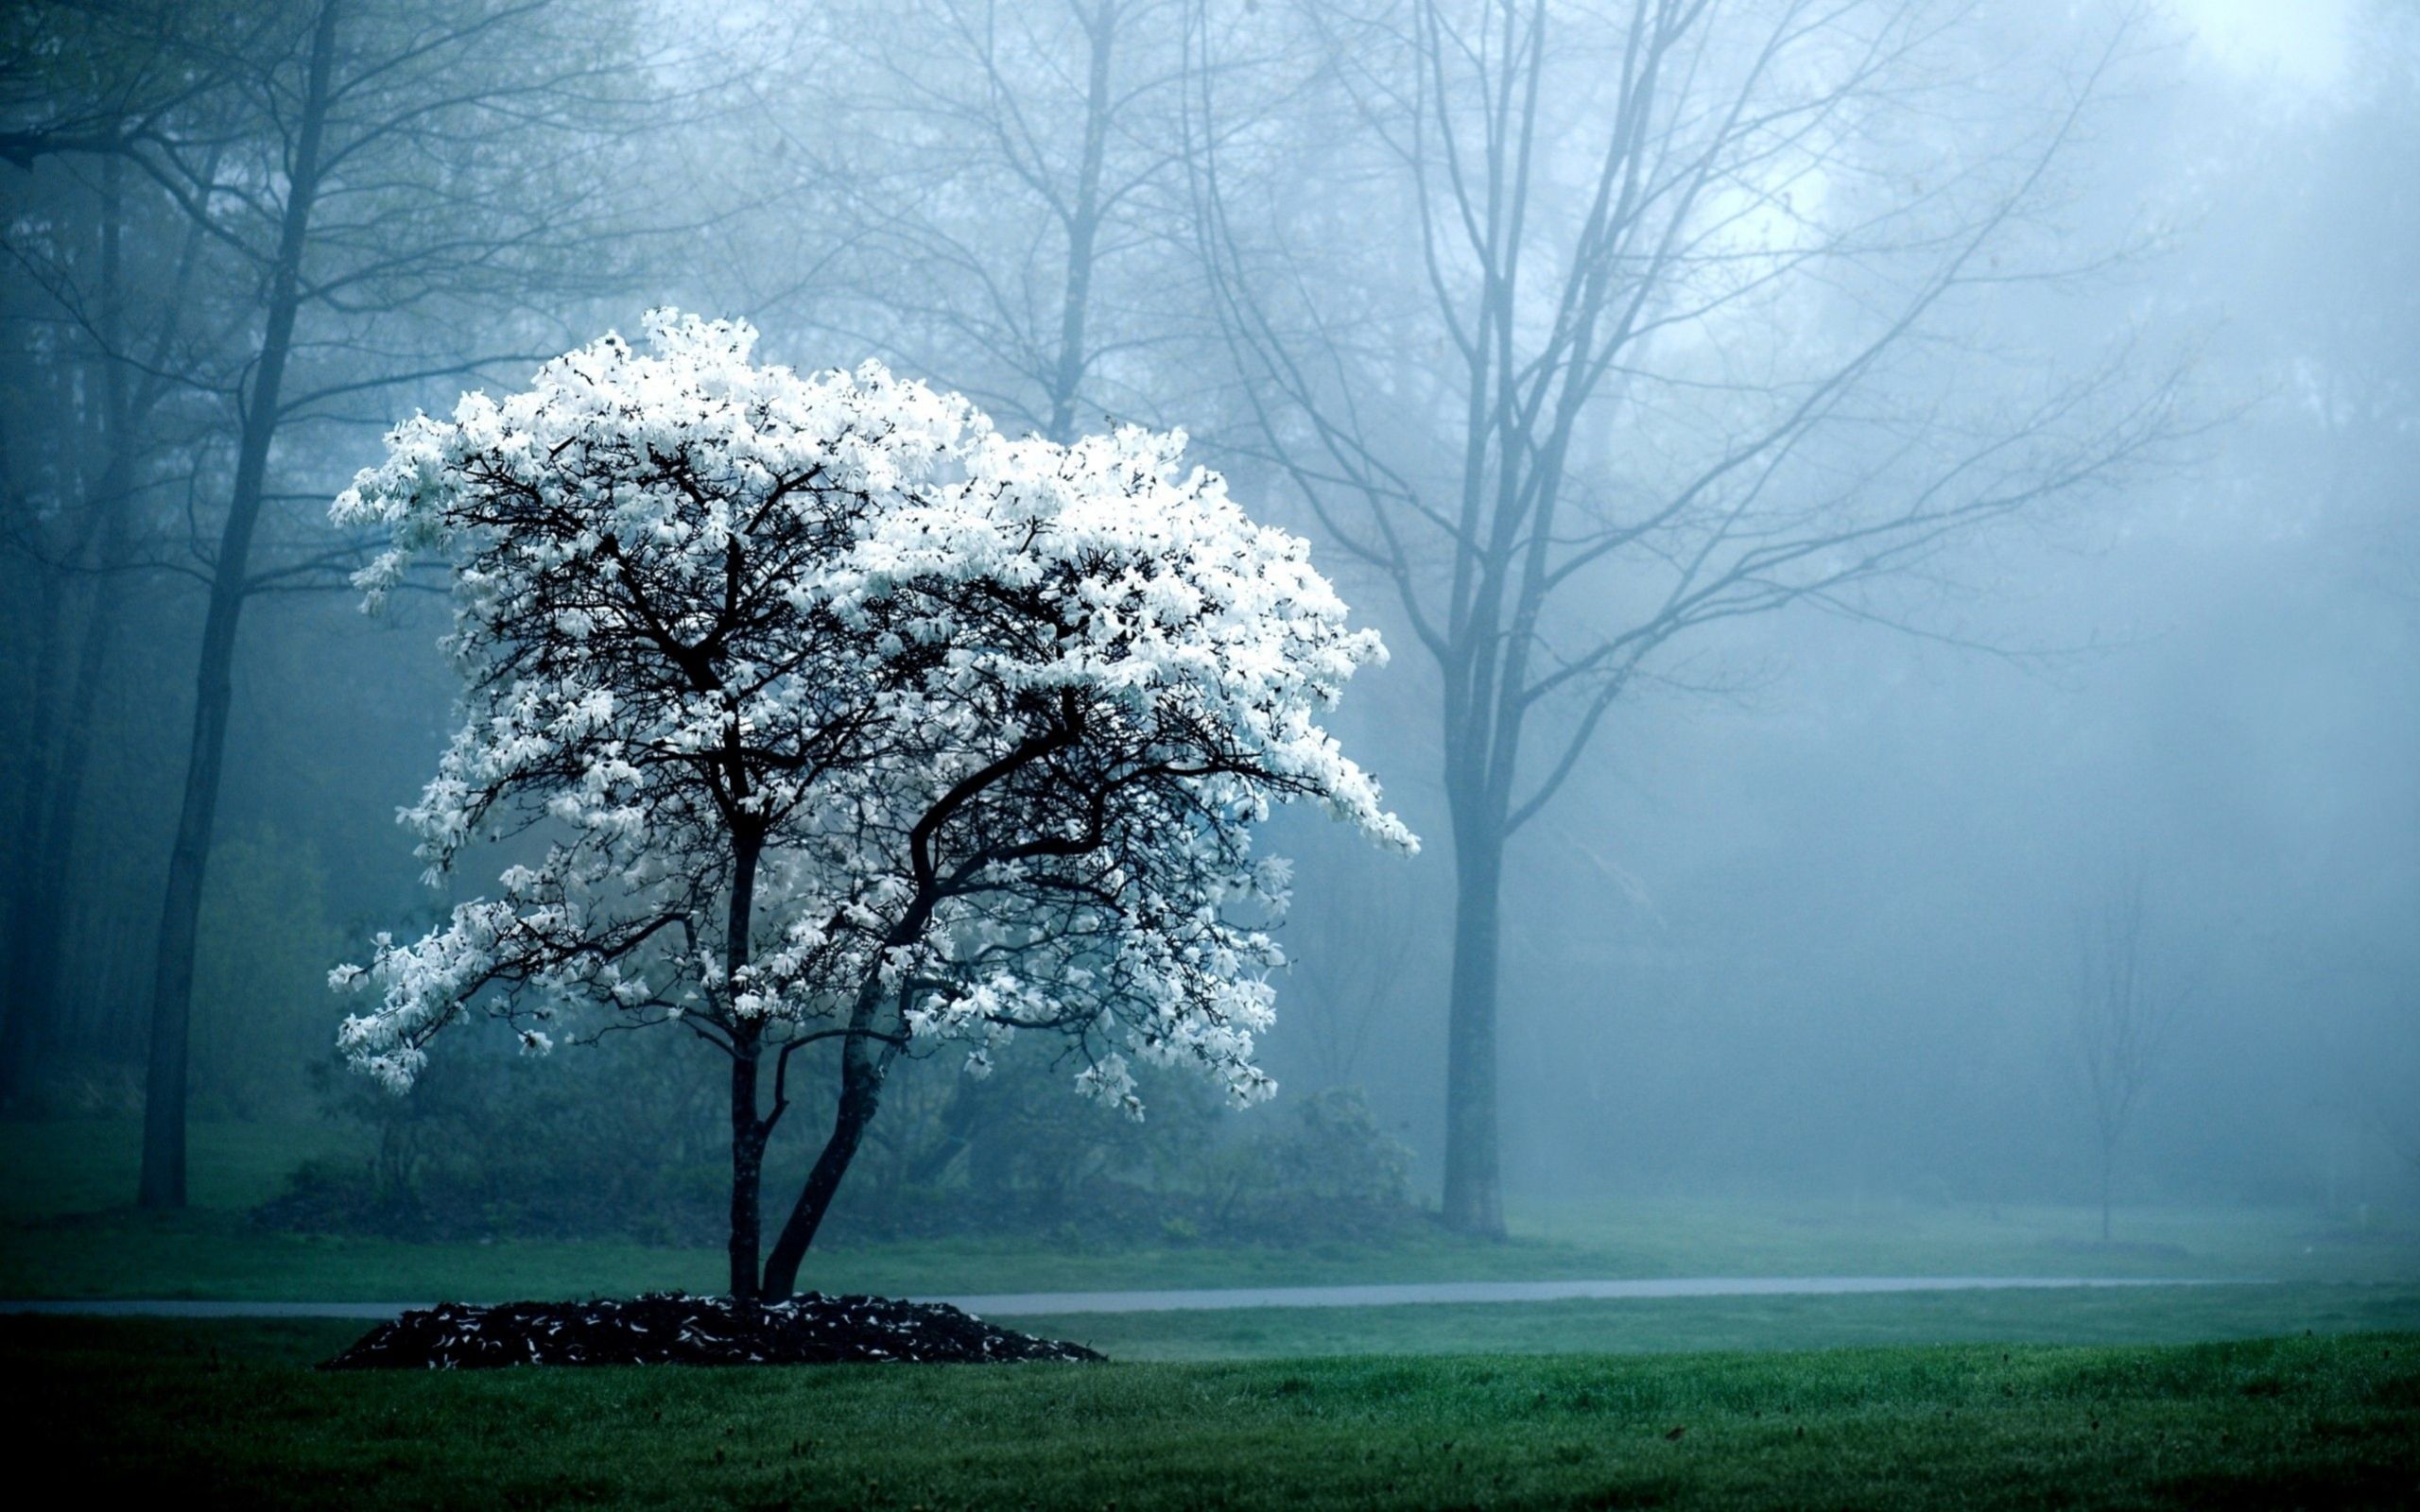 Spring Weather Wallpaper Free Spring Weather Background